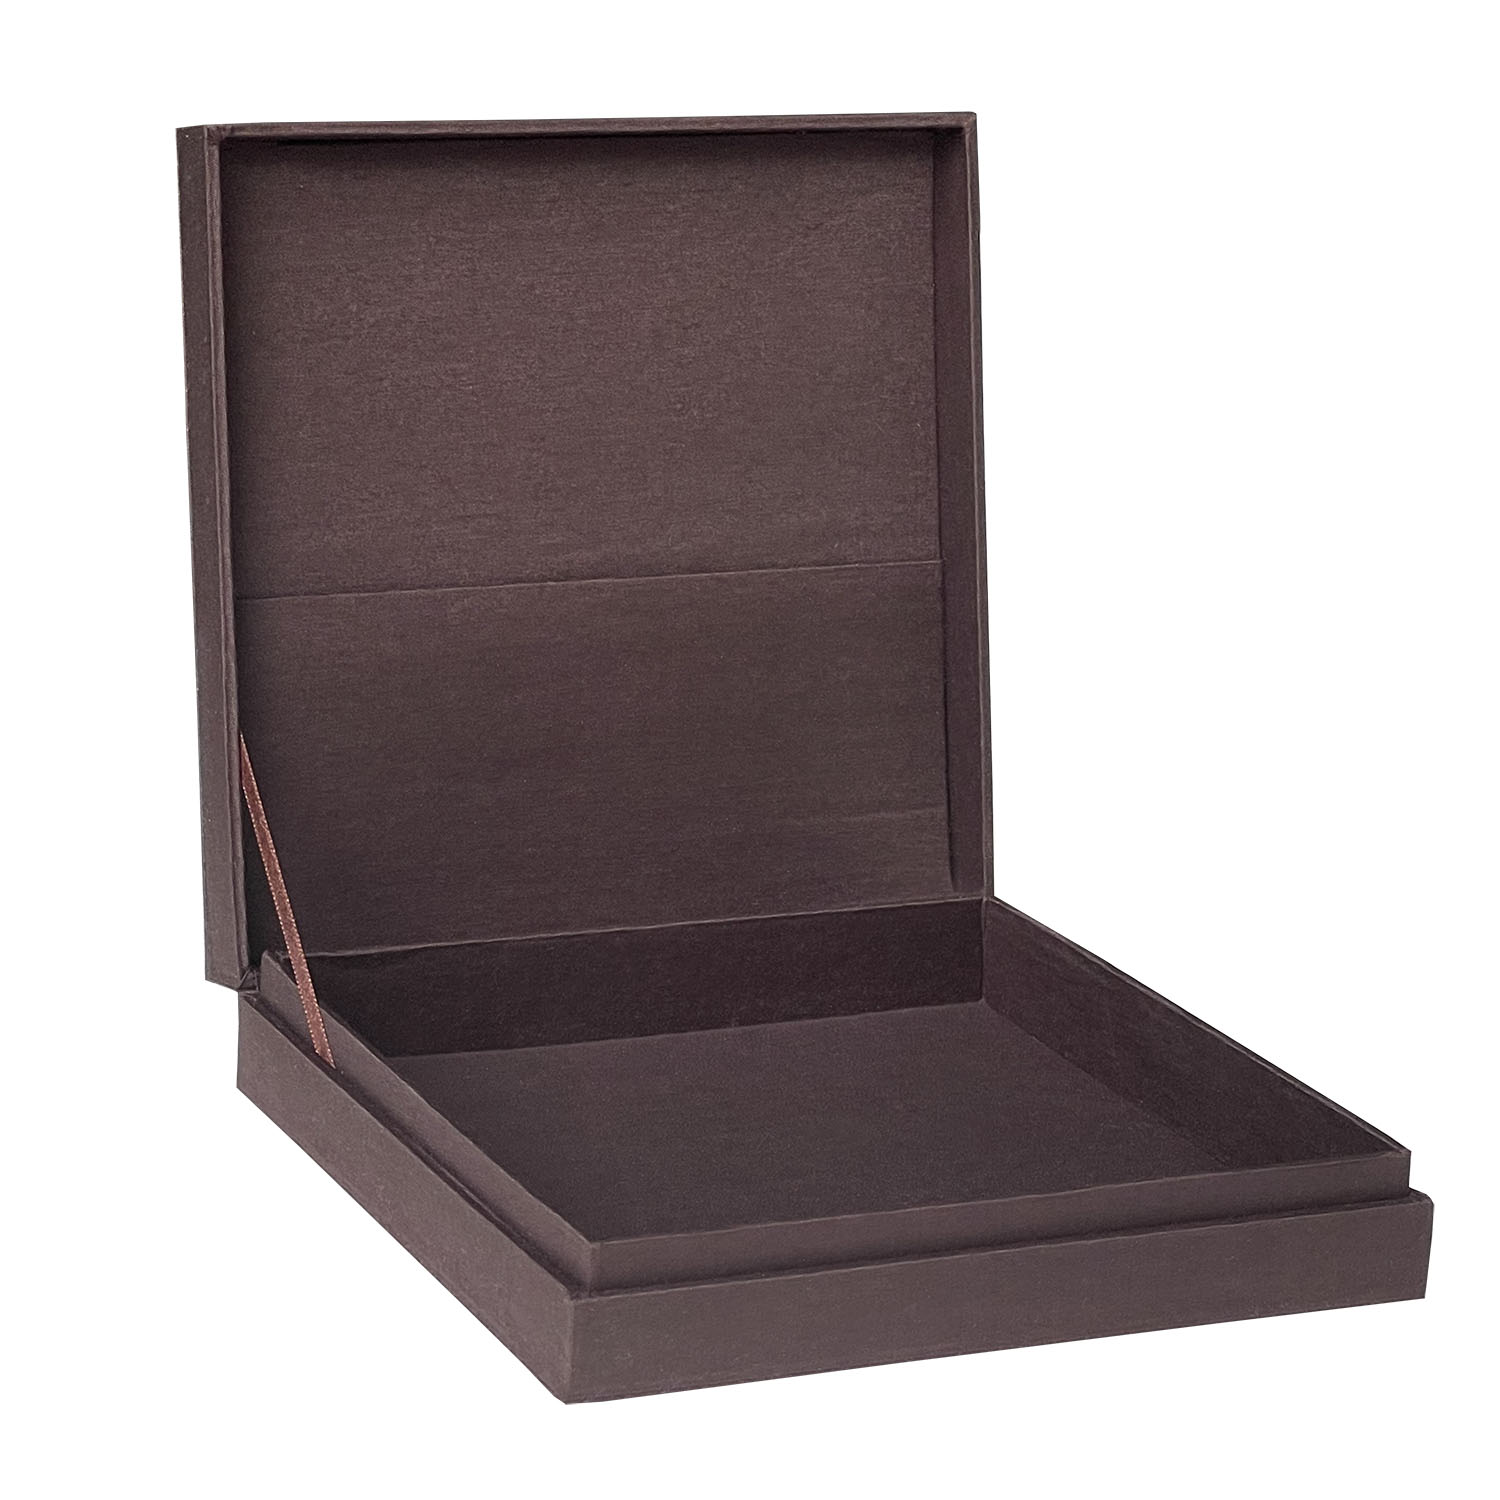 Chocolate brown hinged lid silk box for invitation cards